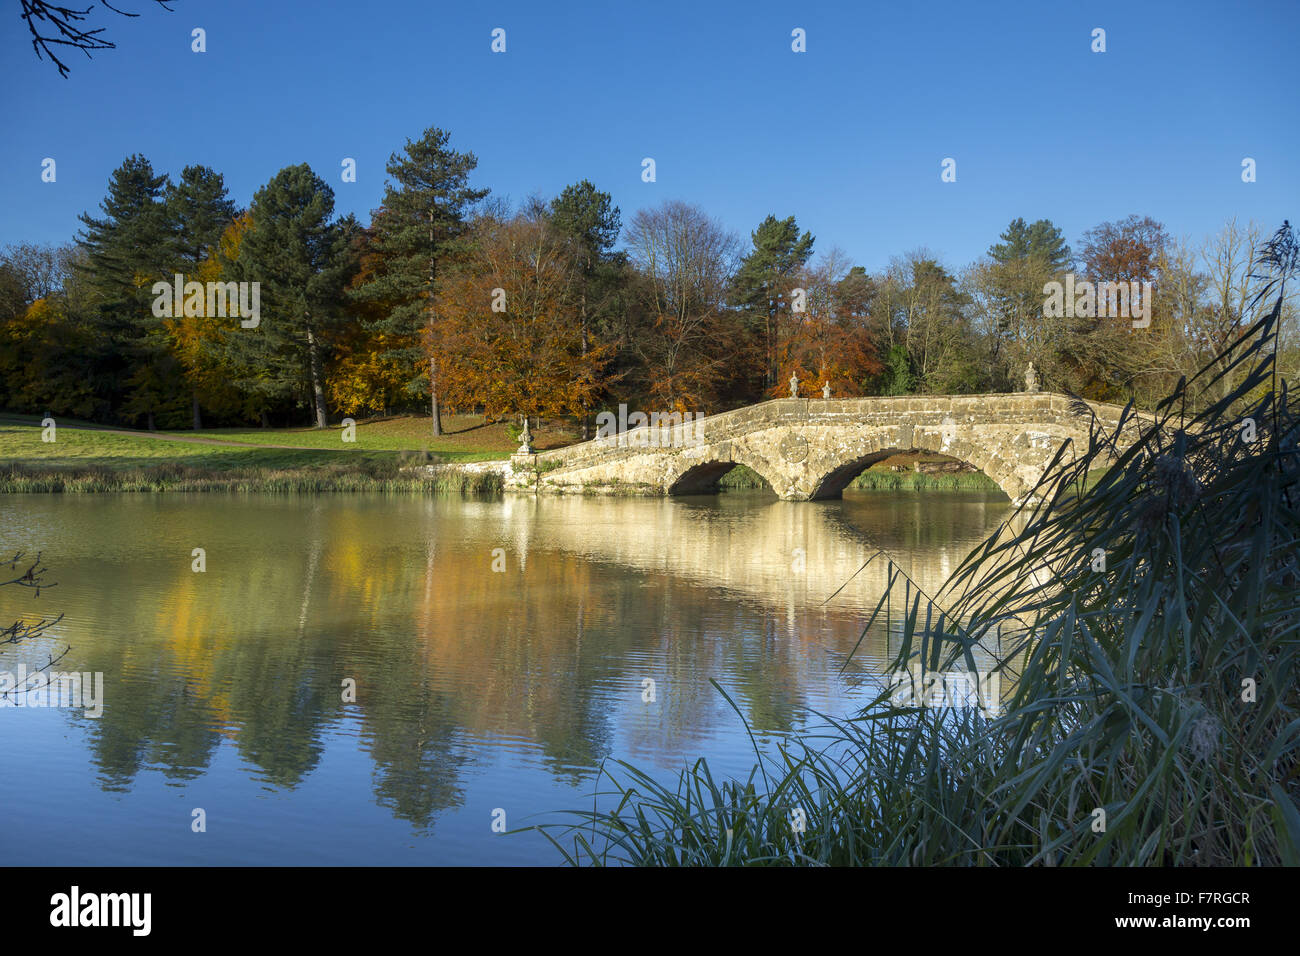 The Oxford Bridge in the autumn at Stowe, Buckinghamshire. Stowe is a landscaped garden with picture-perfect views, winding paths, lakeside walks and classical temples. Stock Photo